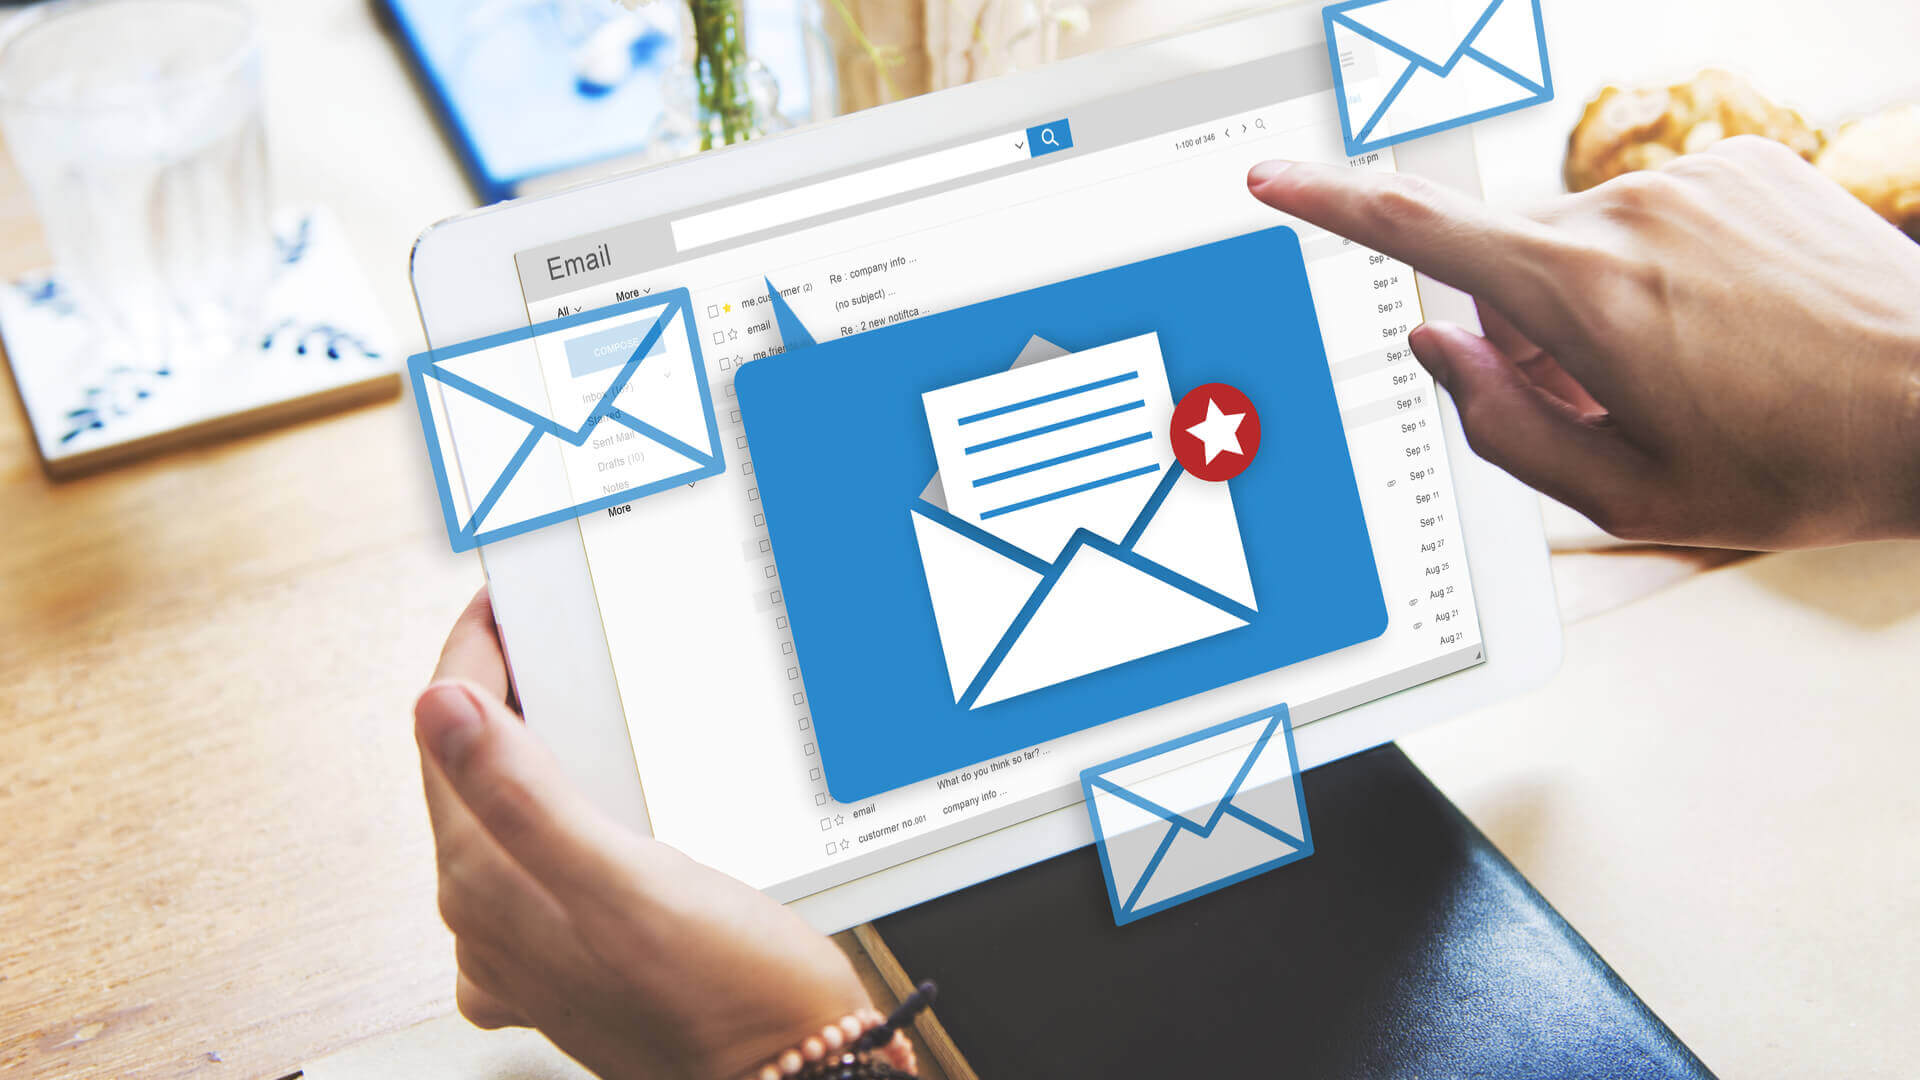 Email marketing benchmark report shows personalized subject lines under-perform